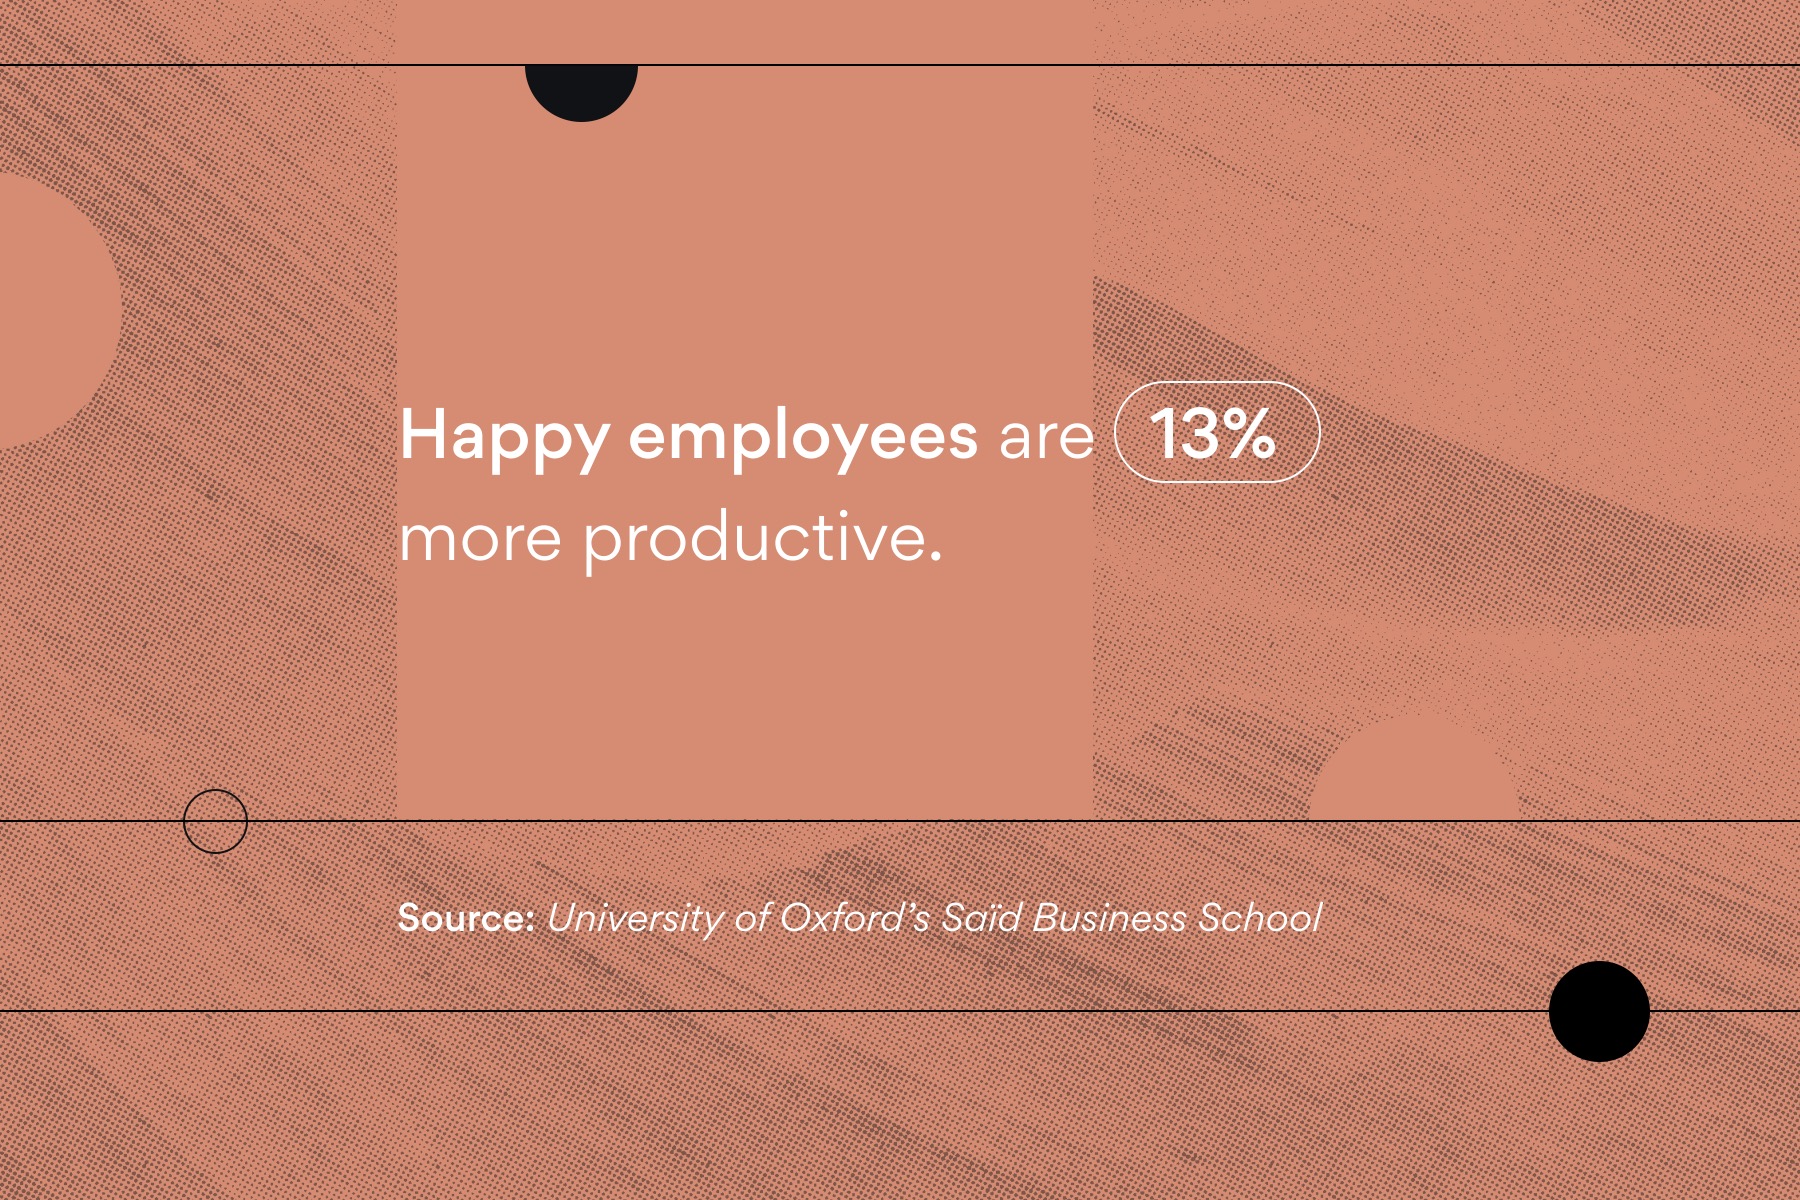 Illustration with the text "Happier employees are 13% more productive."